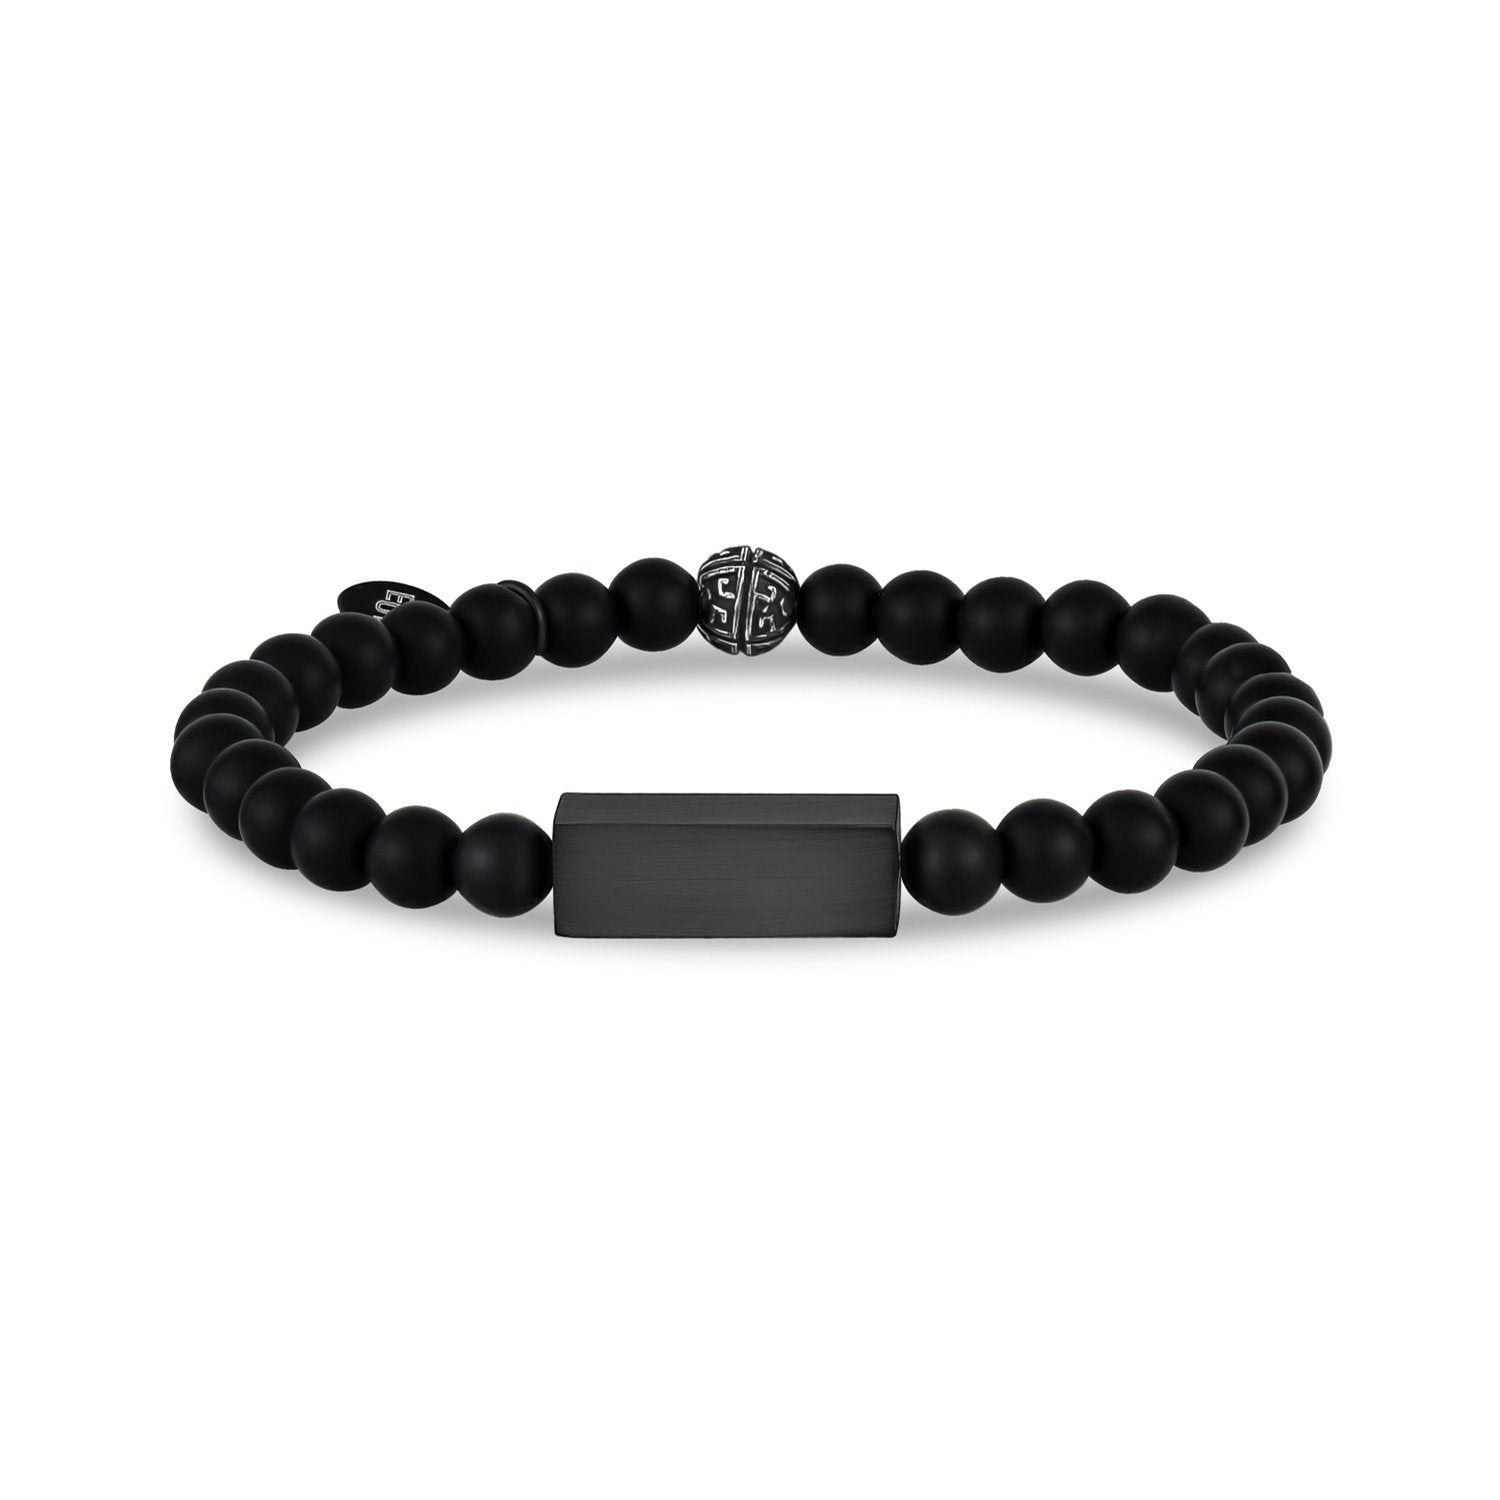 Personalized 6mm Black Matte Onyx Bead Engravable ID Stretch Bracelet 8 Inches / Silver